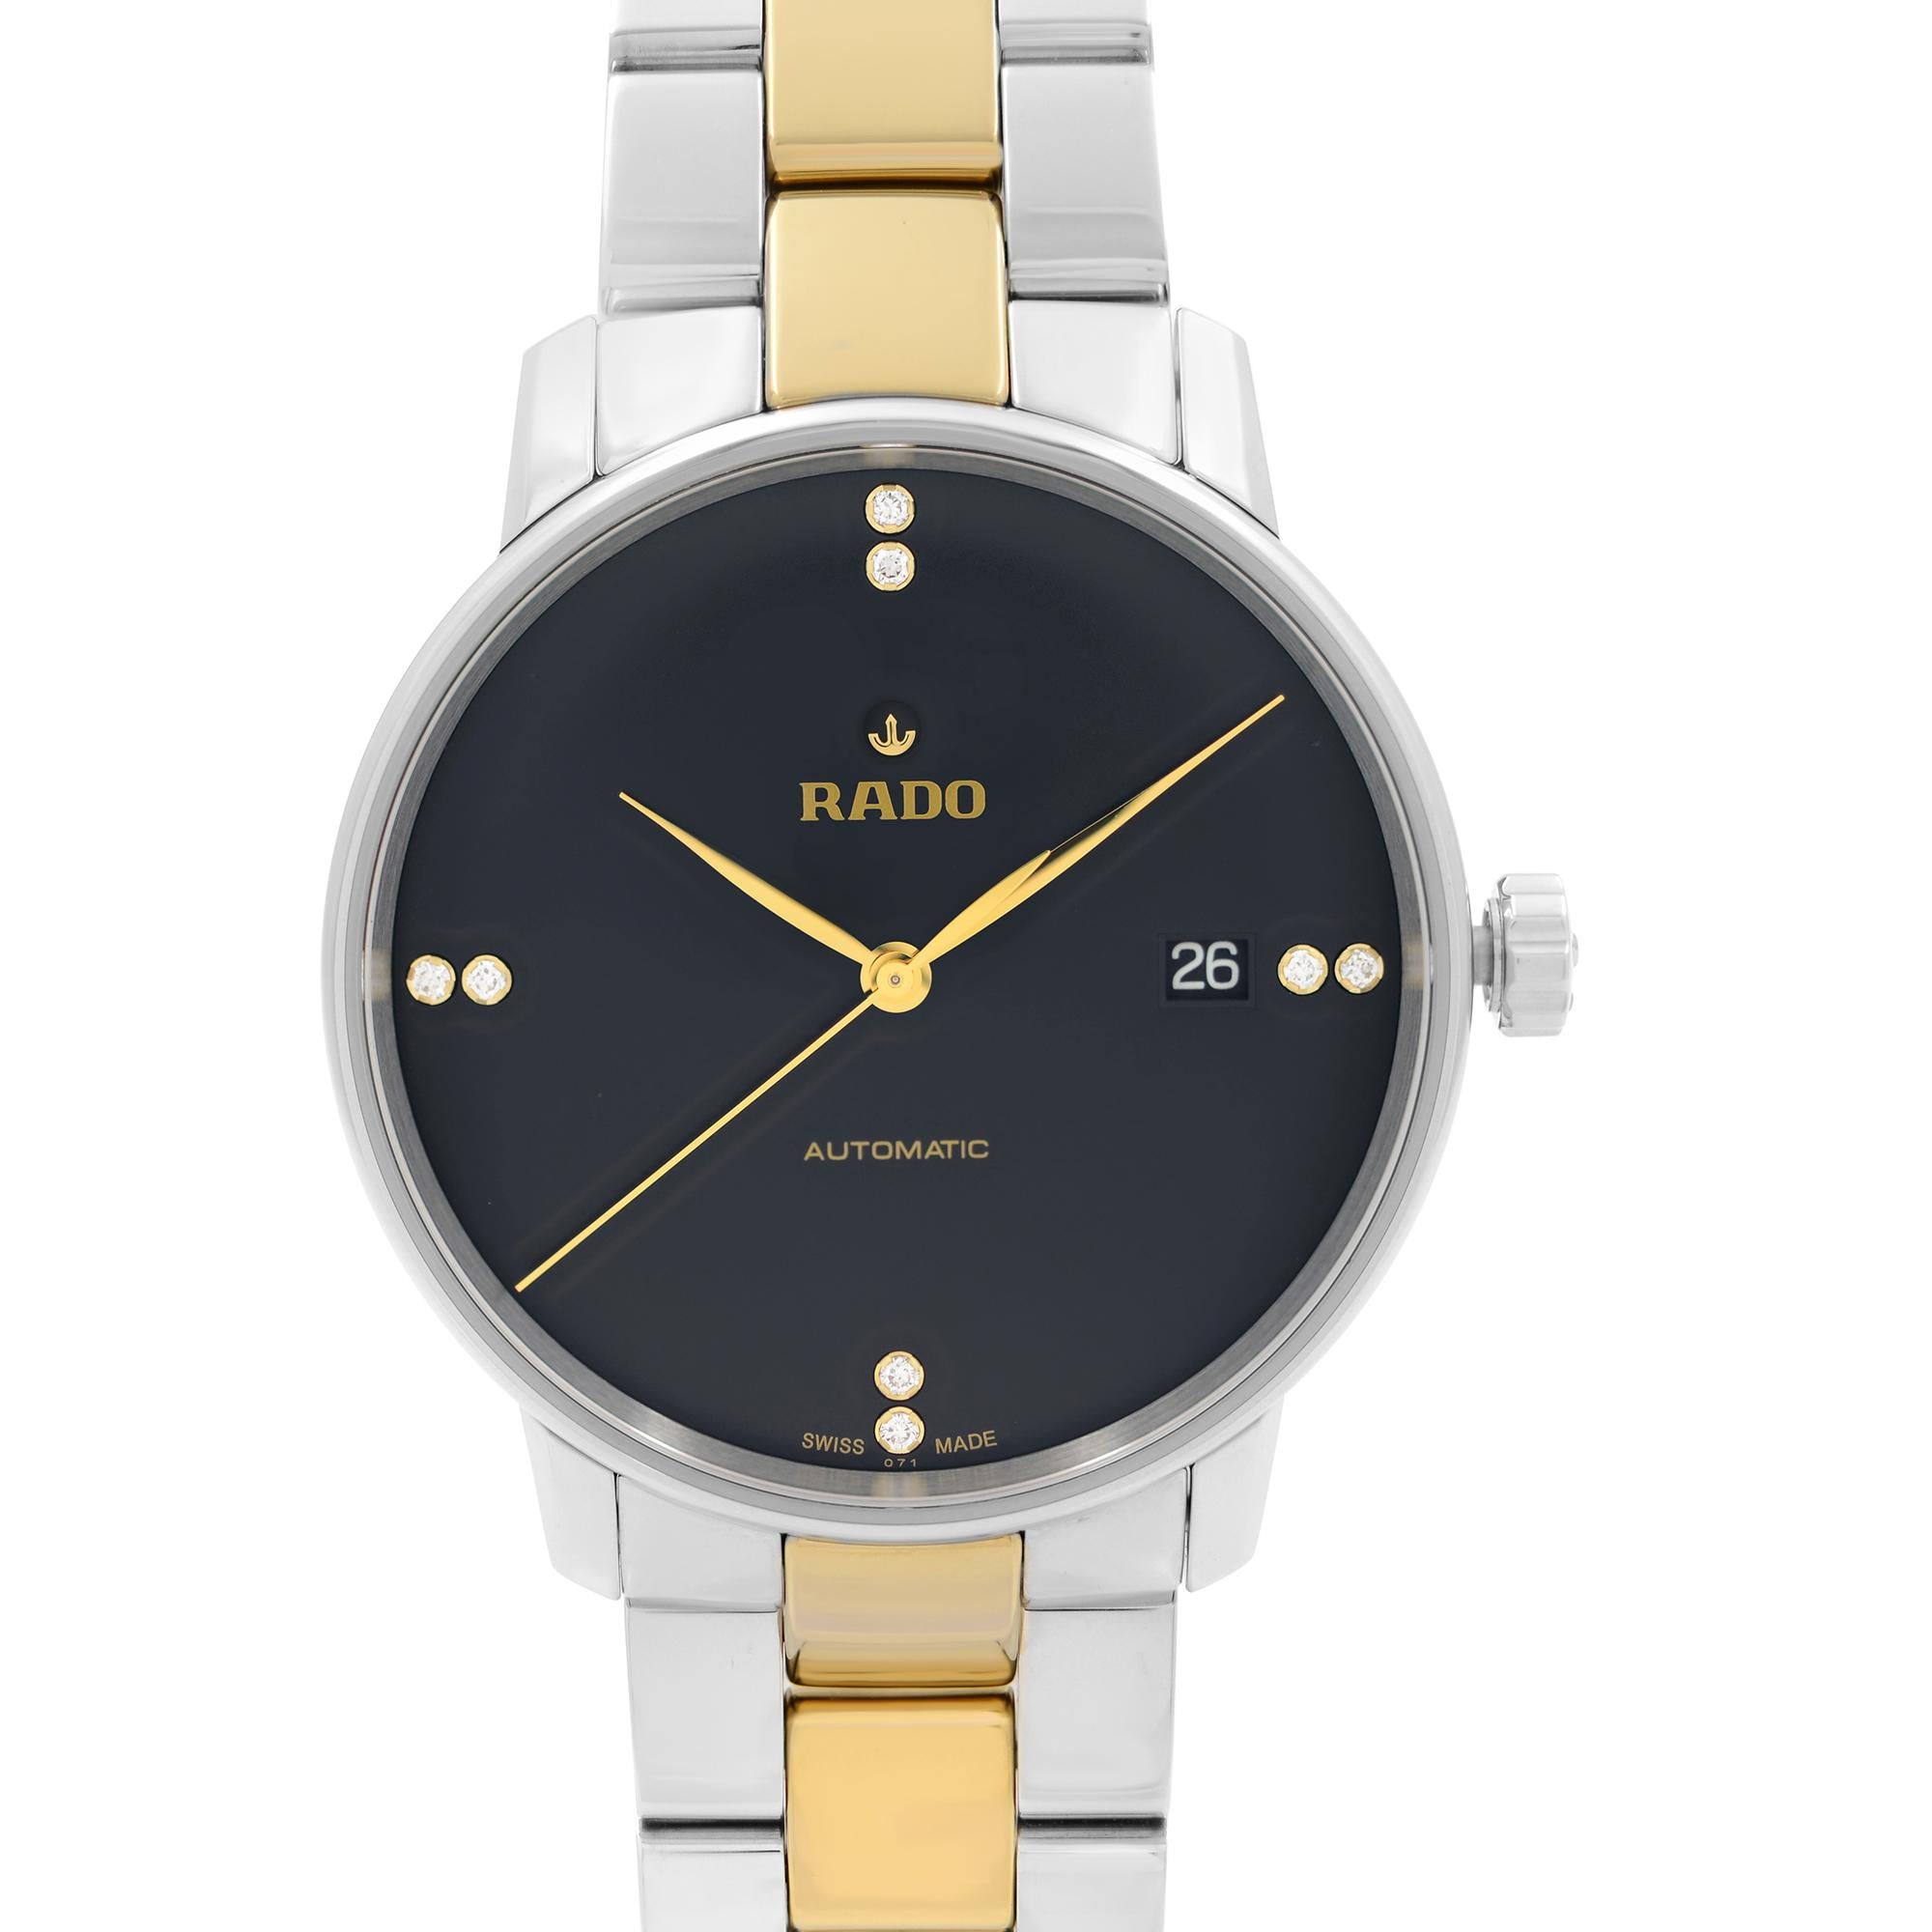 Display Model Rado Coupole Classic Steel Black Diamond Dial Automatic Men's Watch R22860712. Timepiece Features: Stainless Steel Case with a Two-Tone Stainless Steel Bracelet. Black Dial with Yellow Gold-Tone Hands, And Diamond Hour Markers. Comes